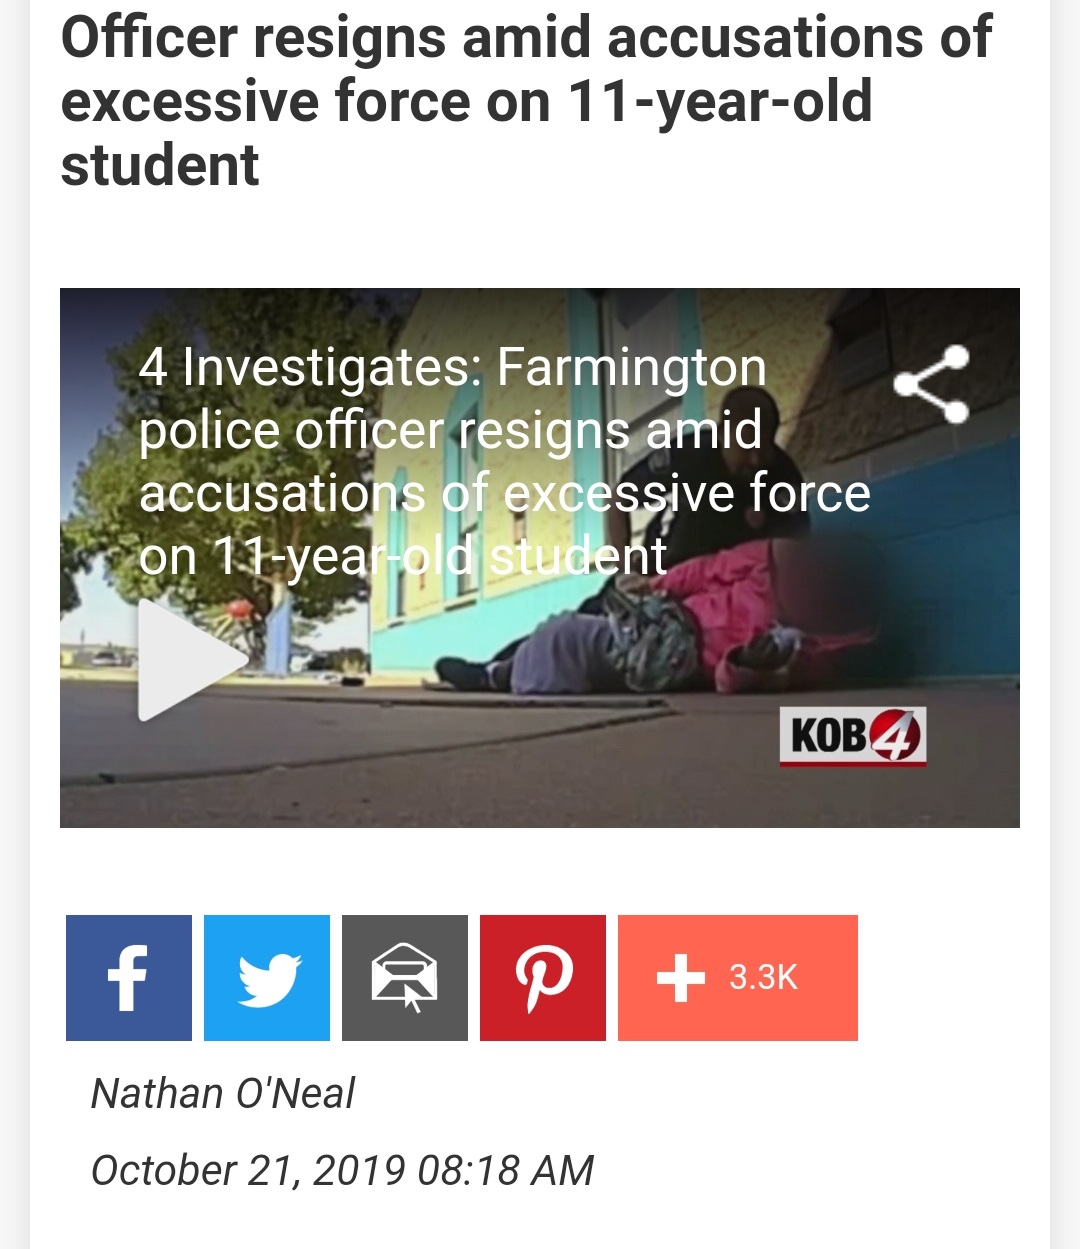 zoho - Officer resigns amid accusations of excessive force on 11yearold student 4 Investigates Farmington police officer resigns amid accusations of excessive force on 17yearold student KOB4 Nathan O'Neal